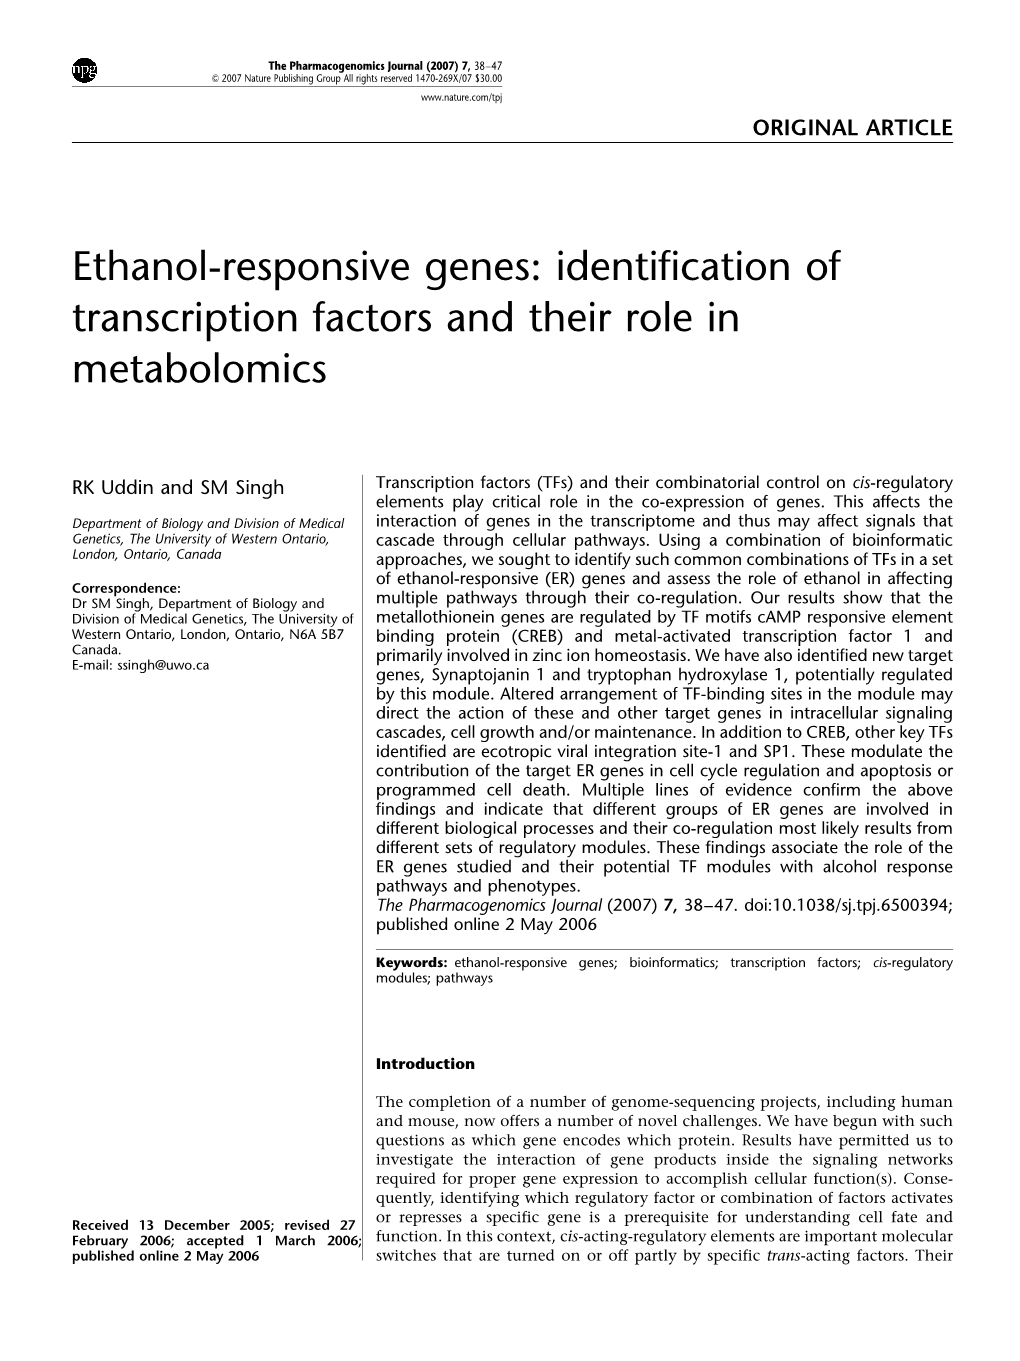 Ethanol-Responsive Genes: Identification of Transcription Factors and Their Role in Metabolomics